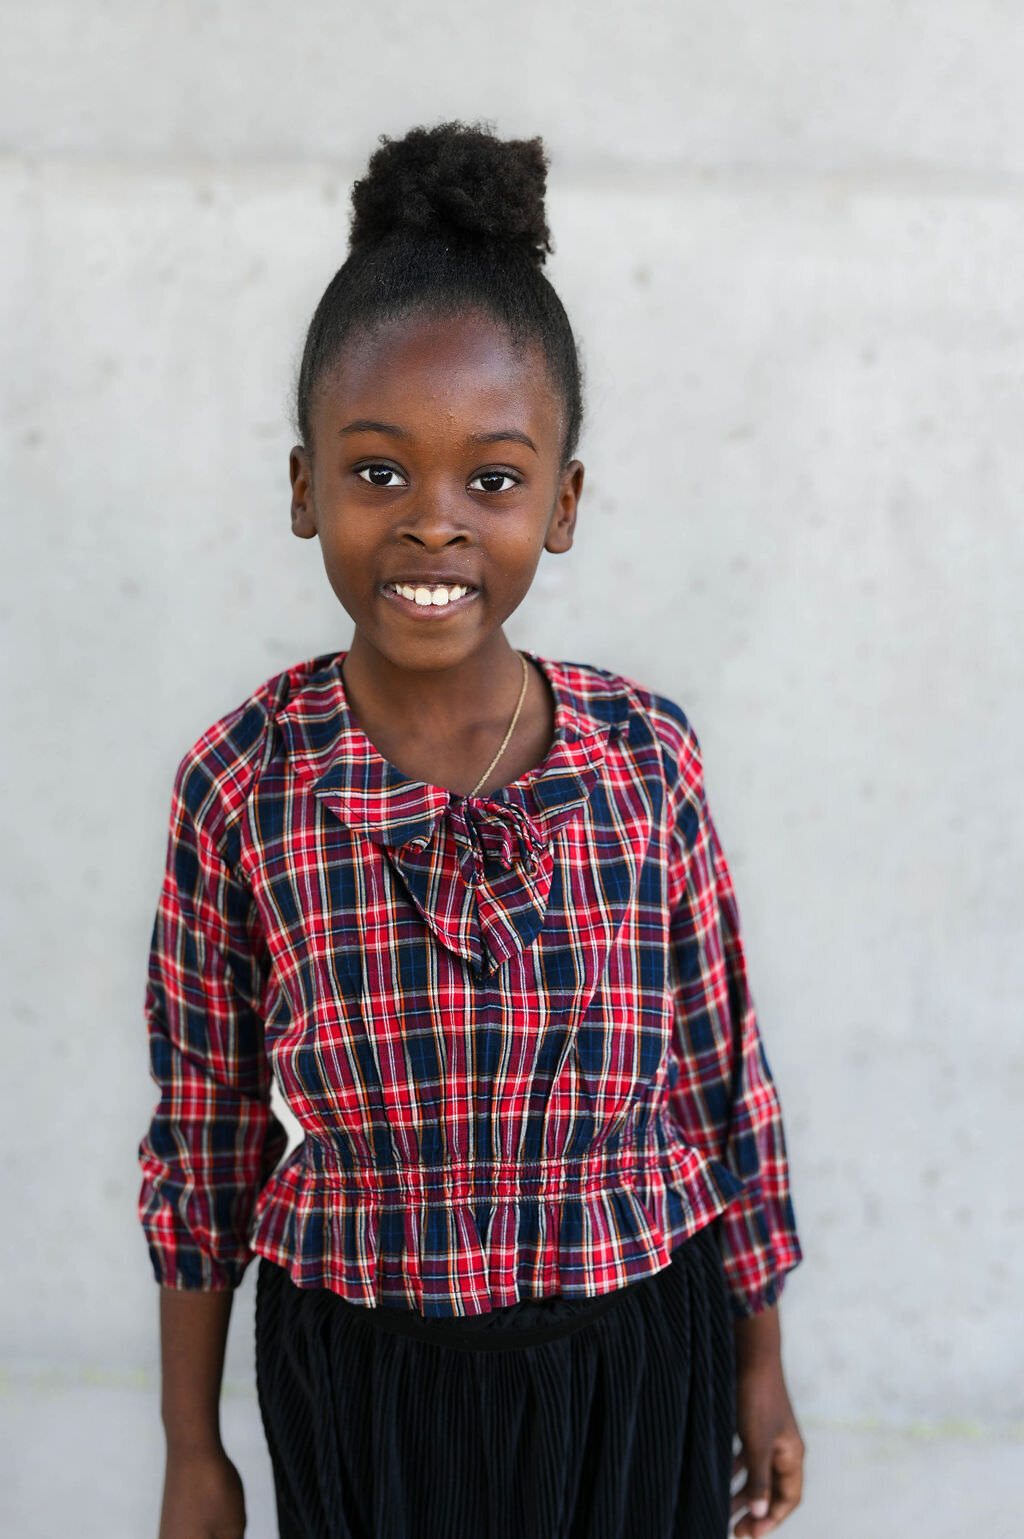 A child smiling while standing against a plain wall.